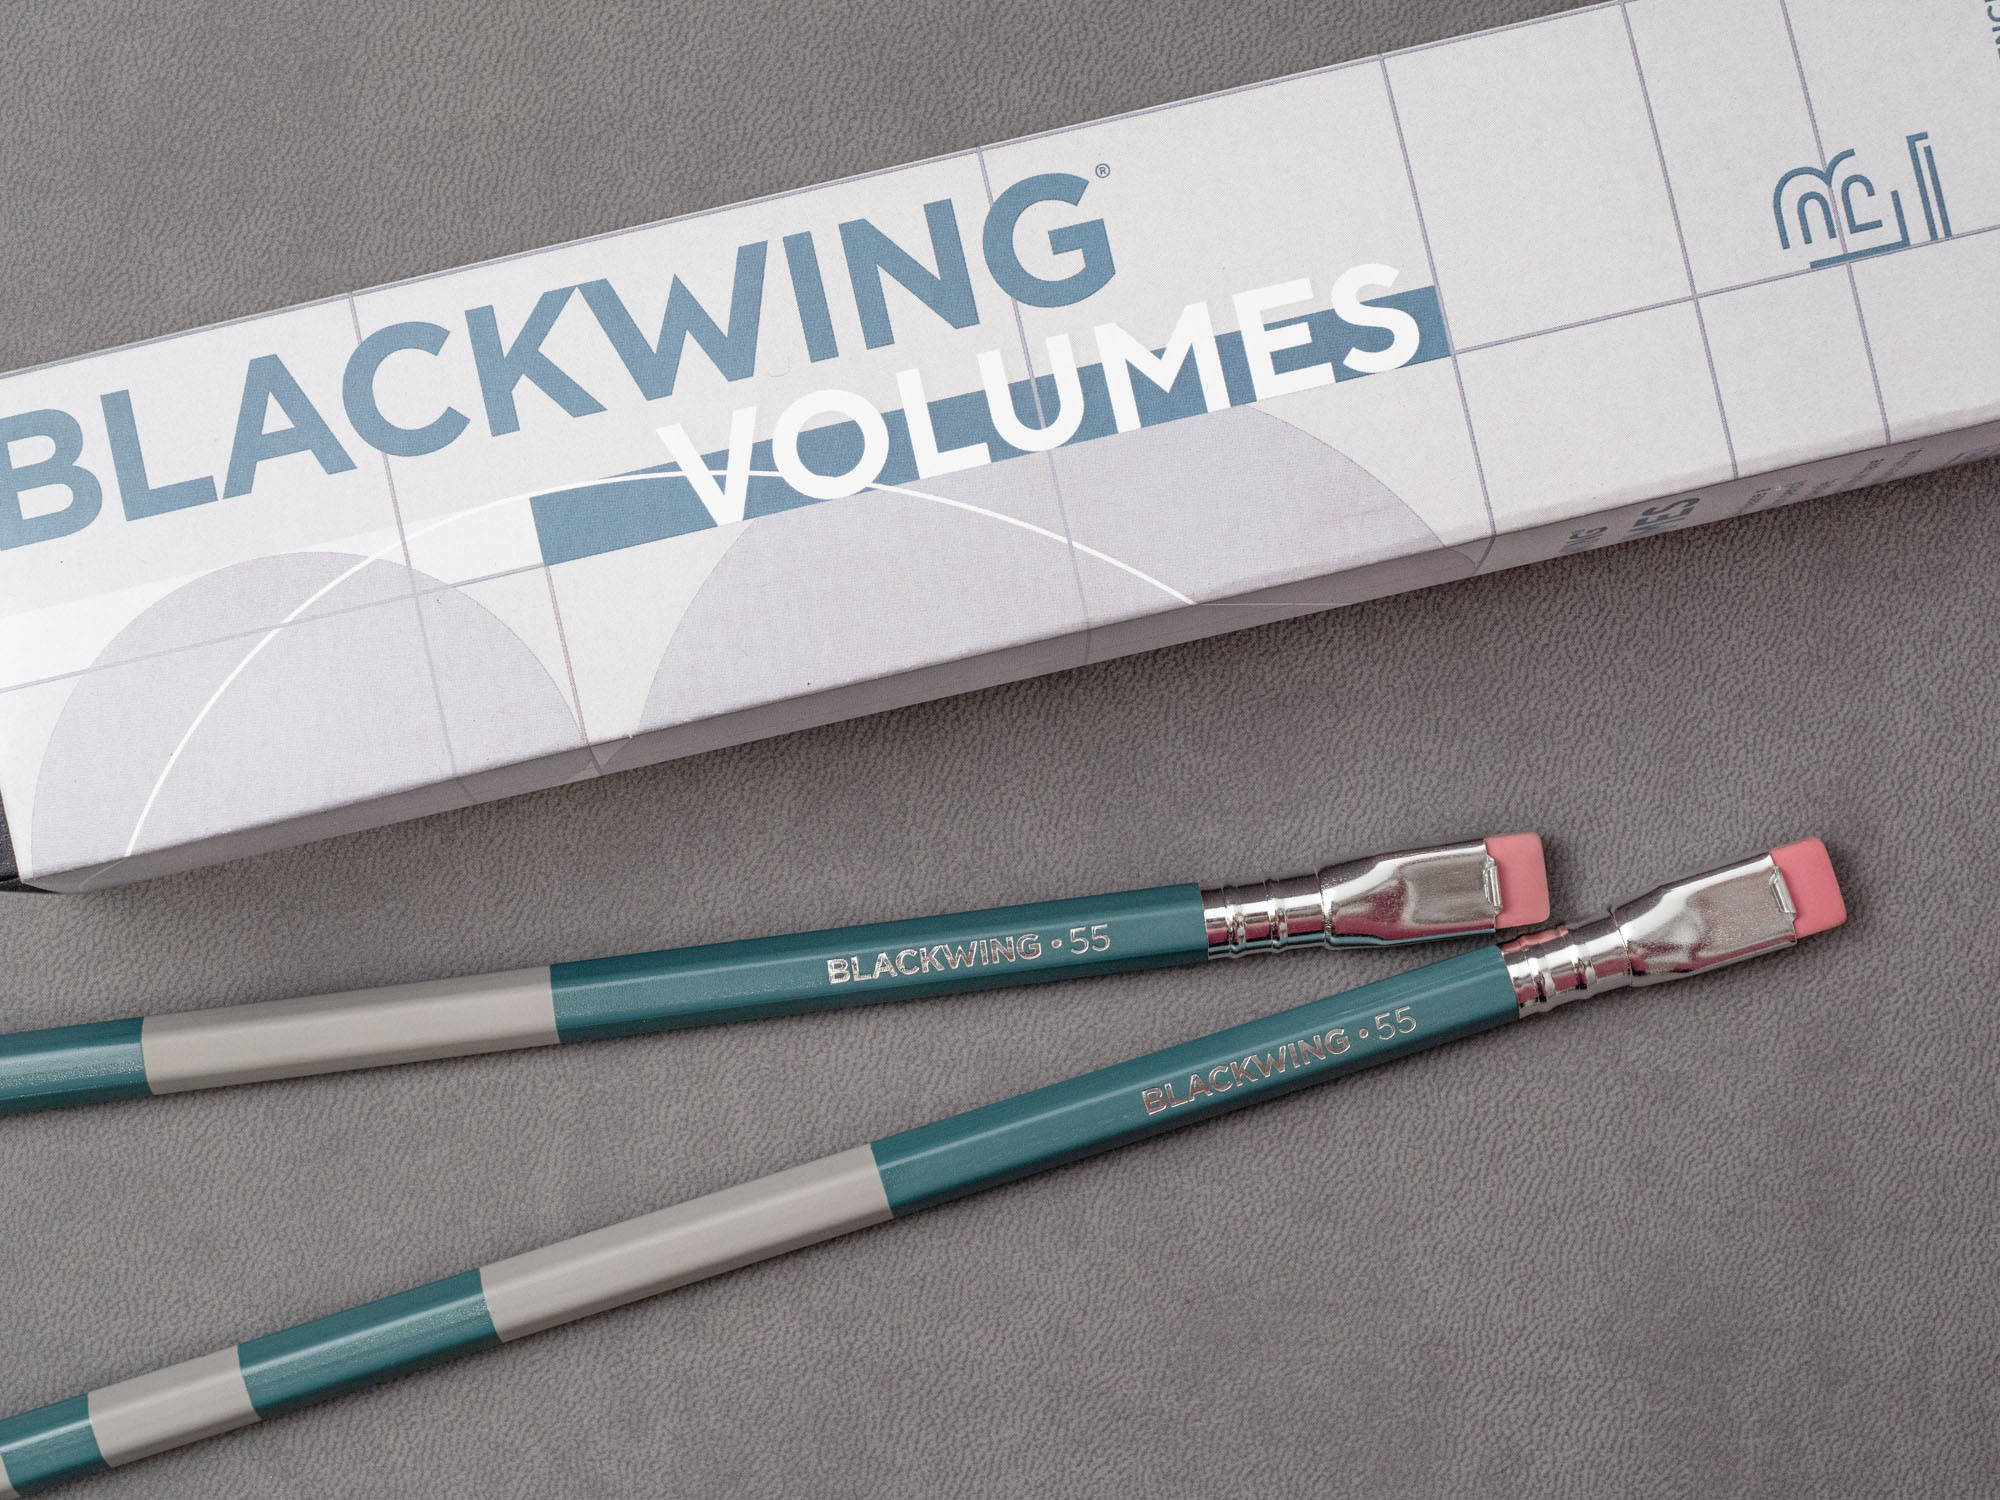 Blackwing Pencil Set - Quotes - Eames Office